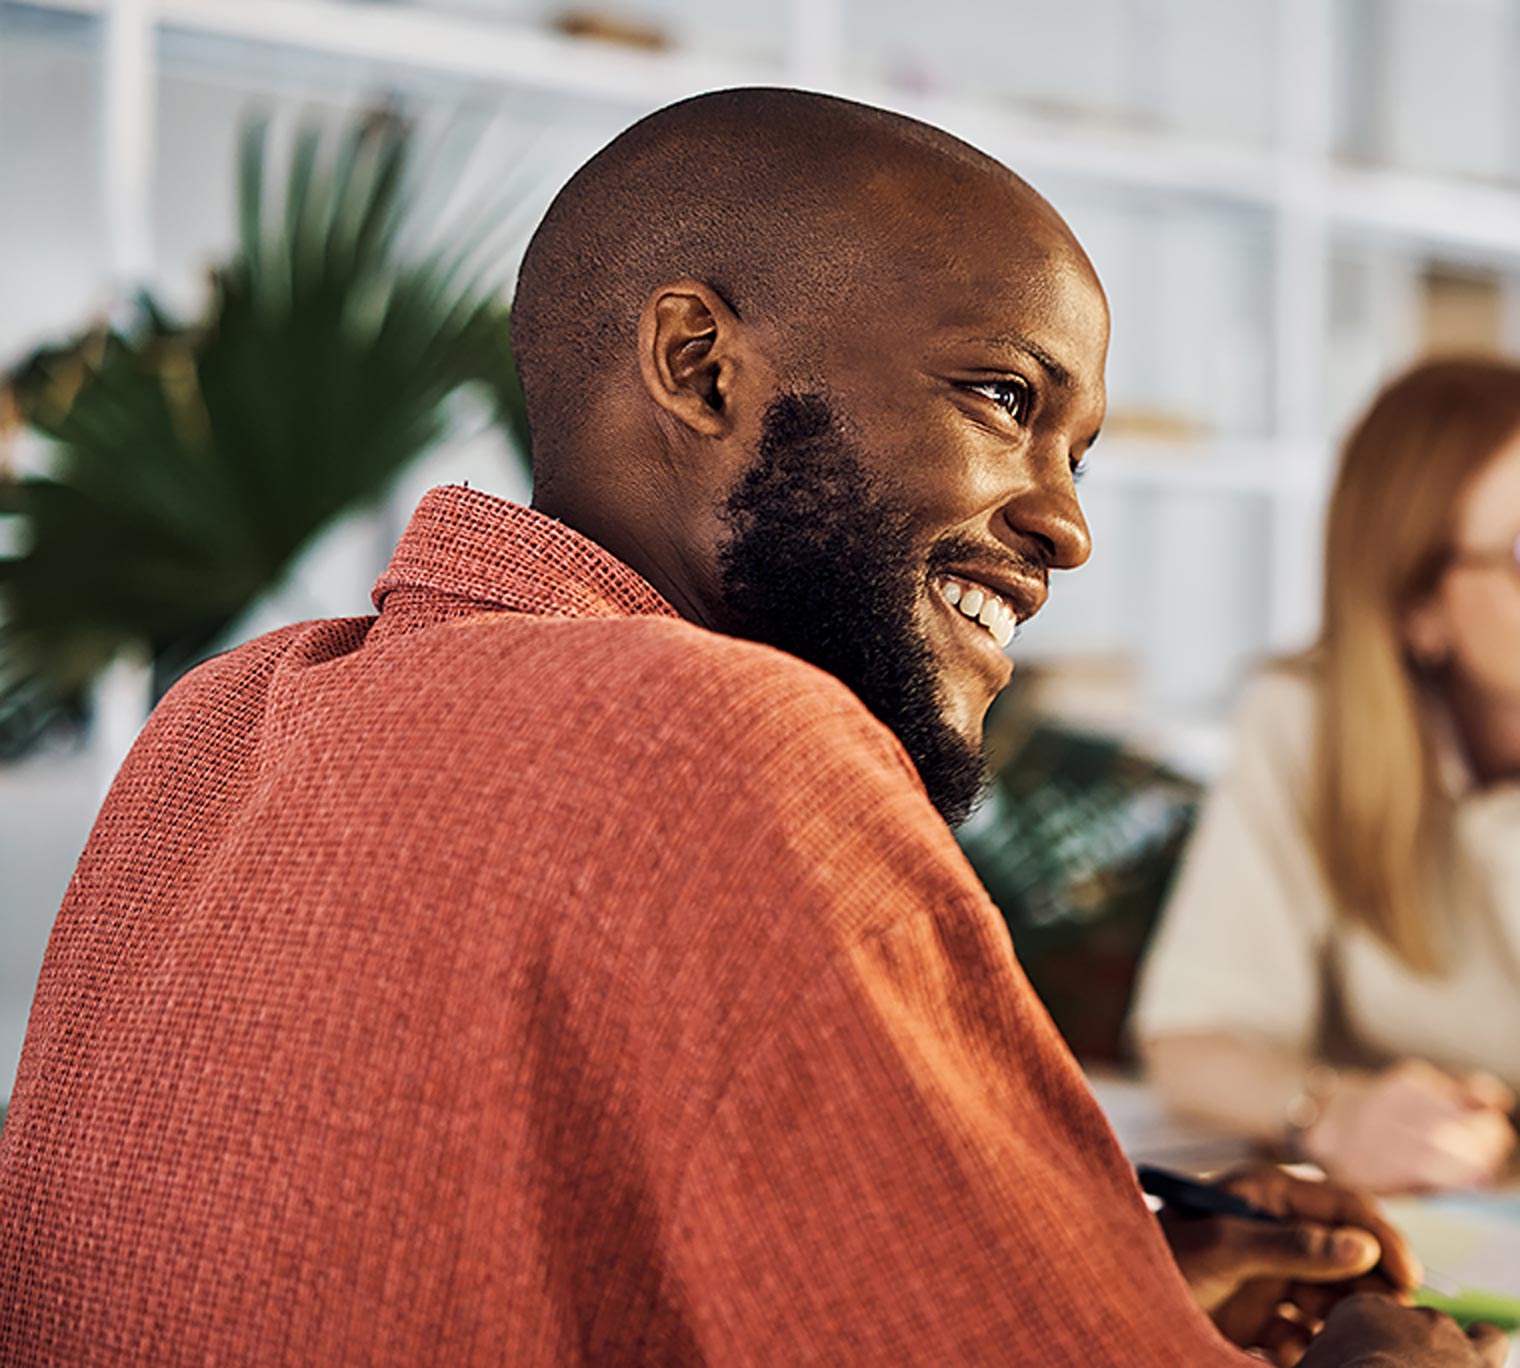 African American man smiling in a meeting at work